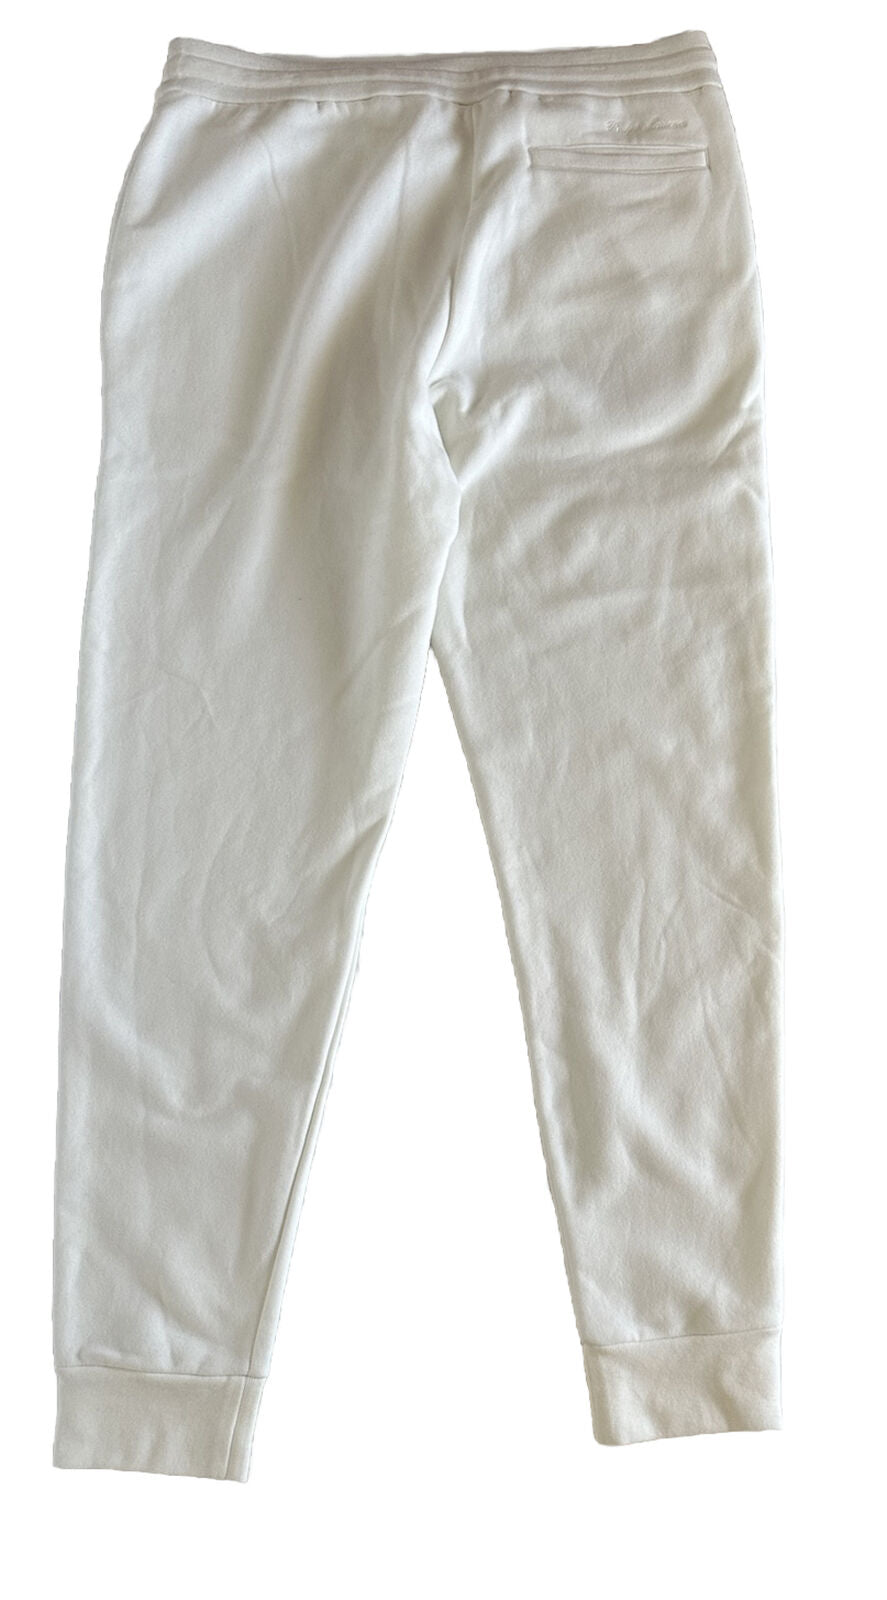 NWT $695 Ralph Lauren Purple Label Casual White Pants Medium Made in Italy